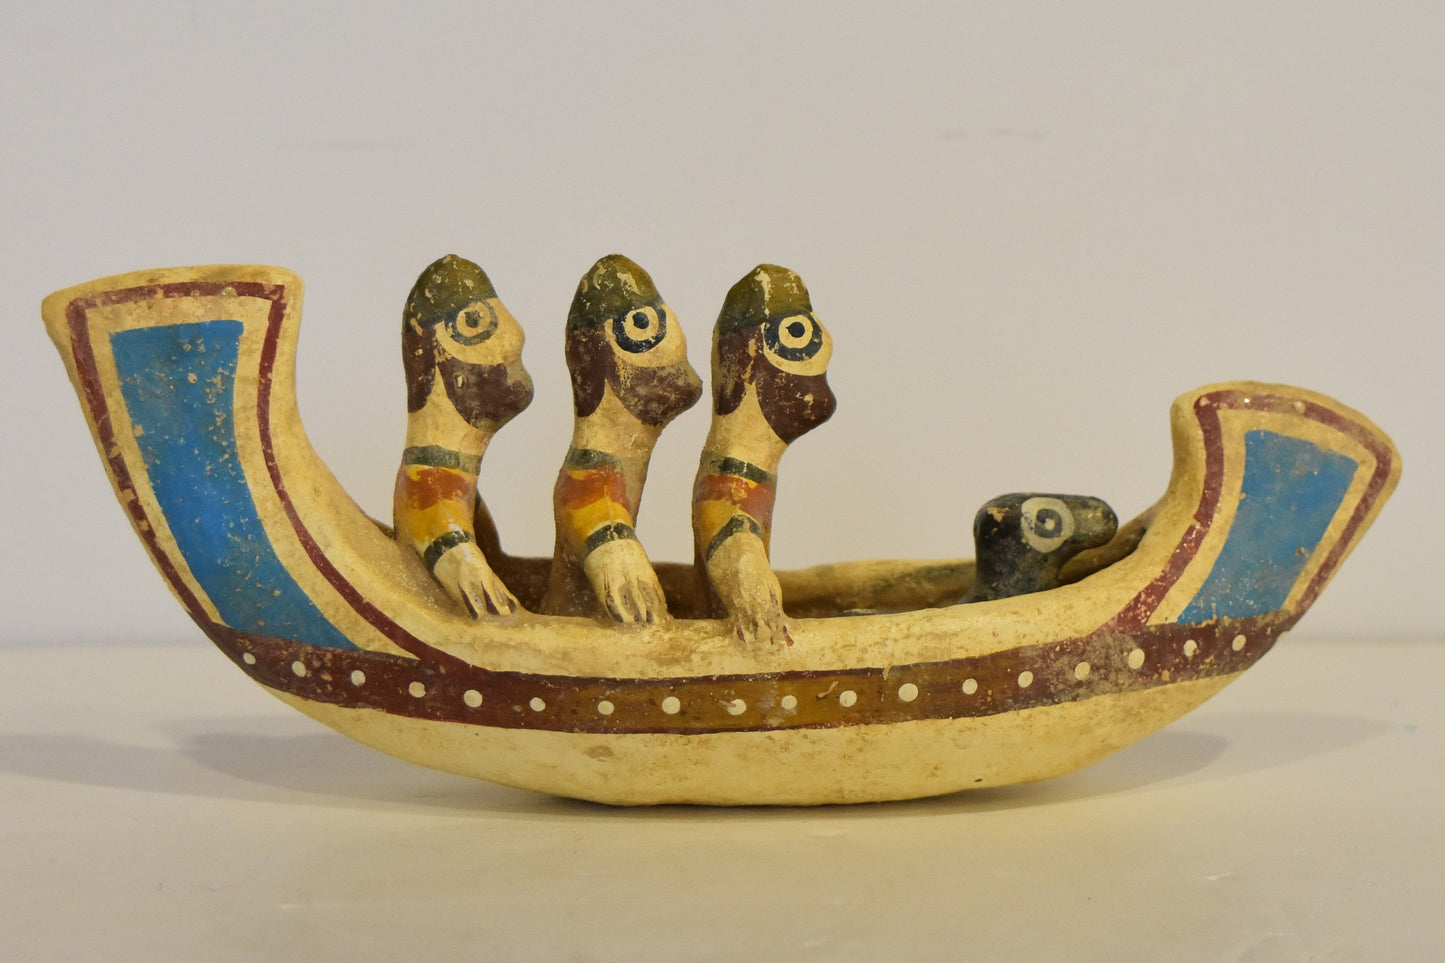 Terracotta Βoat with Three Rowers - Cyprus - ca 1100 BC - Museum Reproduction - Ceramic Artifact